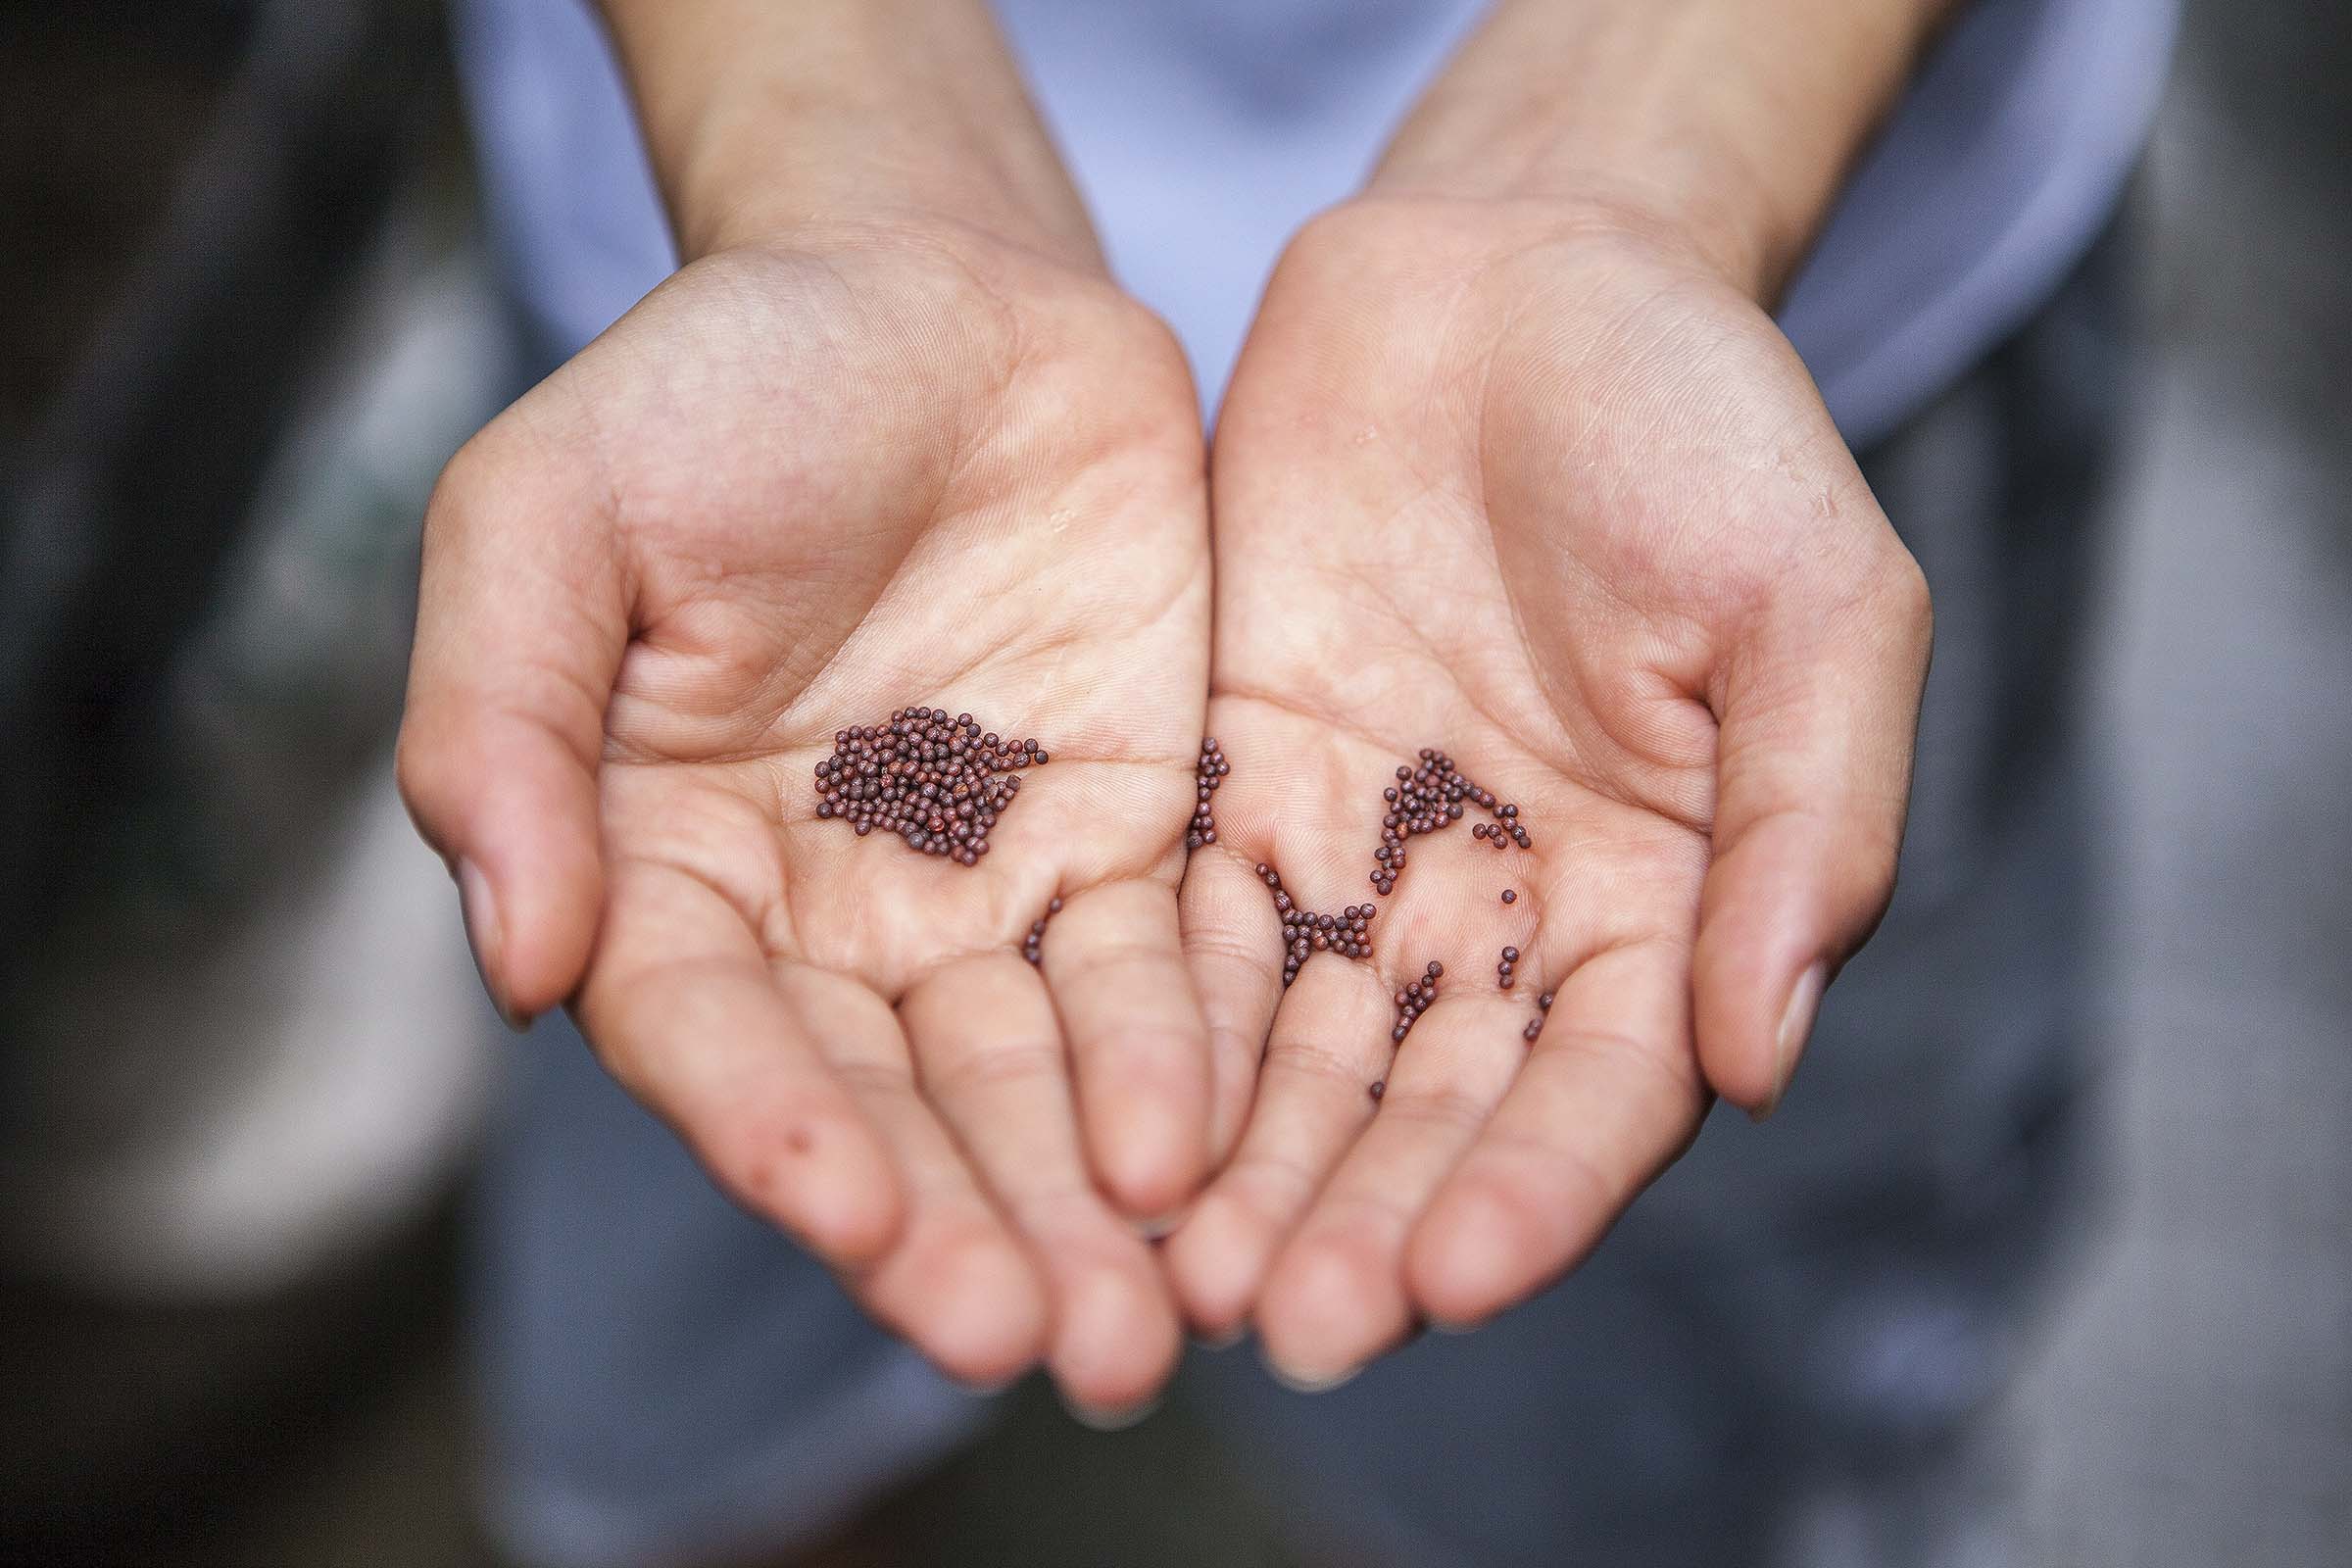 Hands with seeds